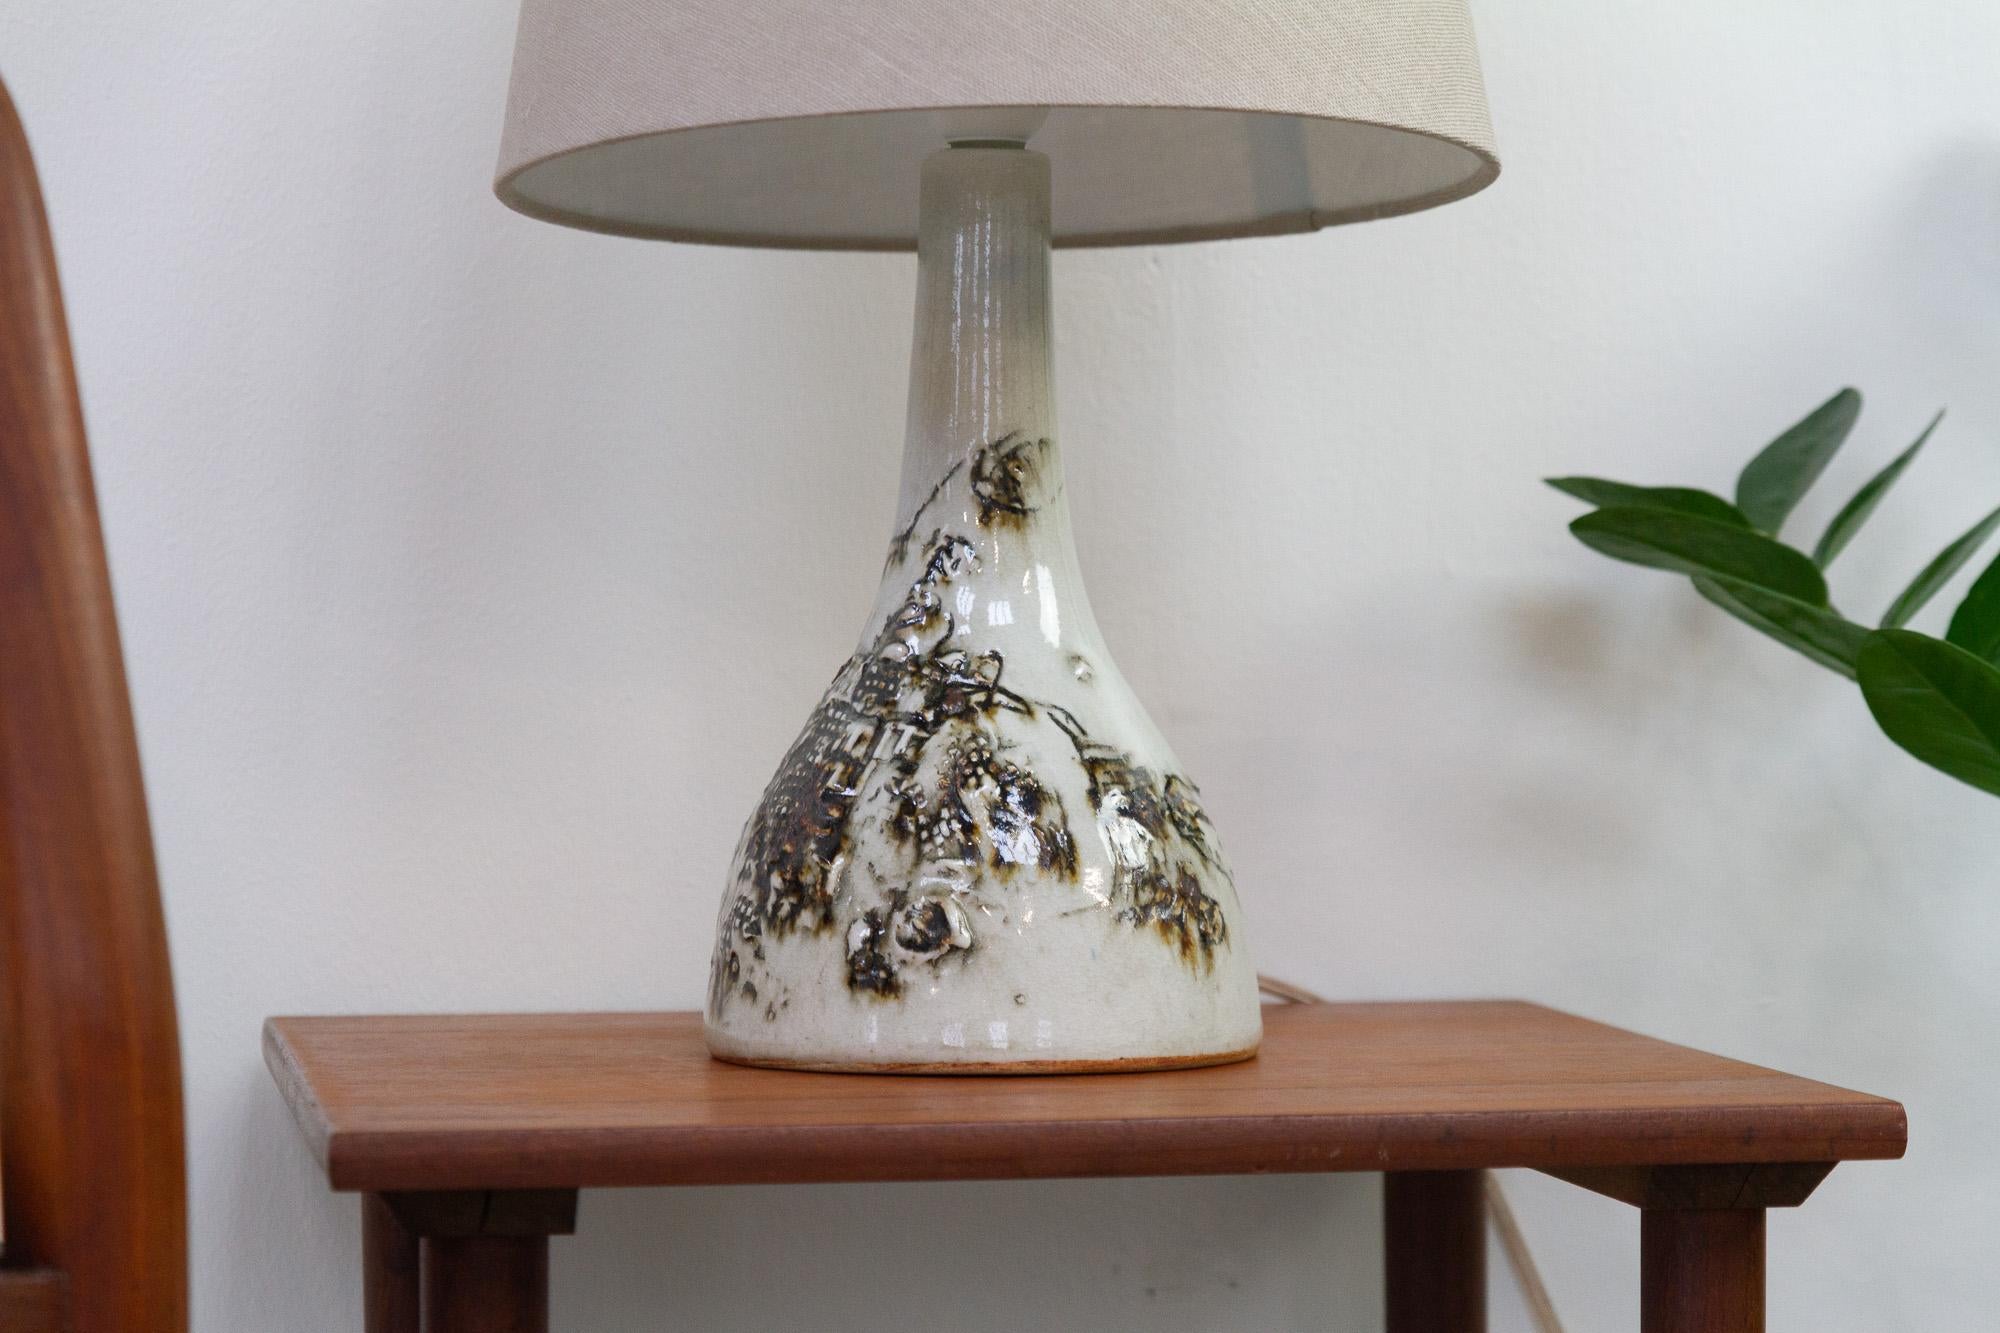 Vintage Danish Brutalist Ceramic Table Lamp by Conny Walther, 1960s For Sale 8